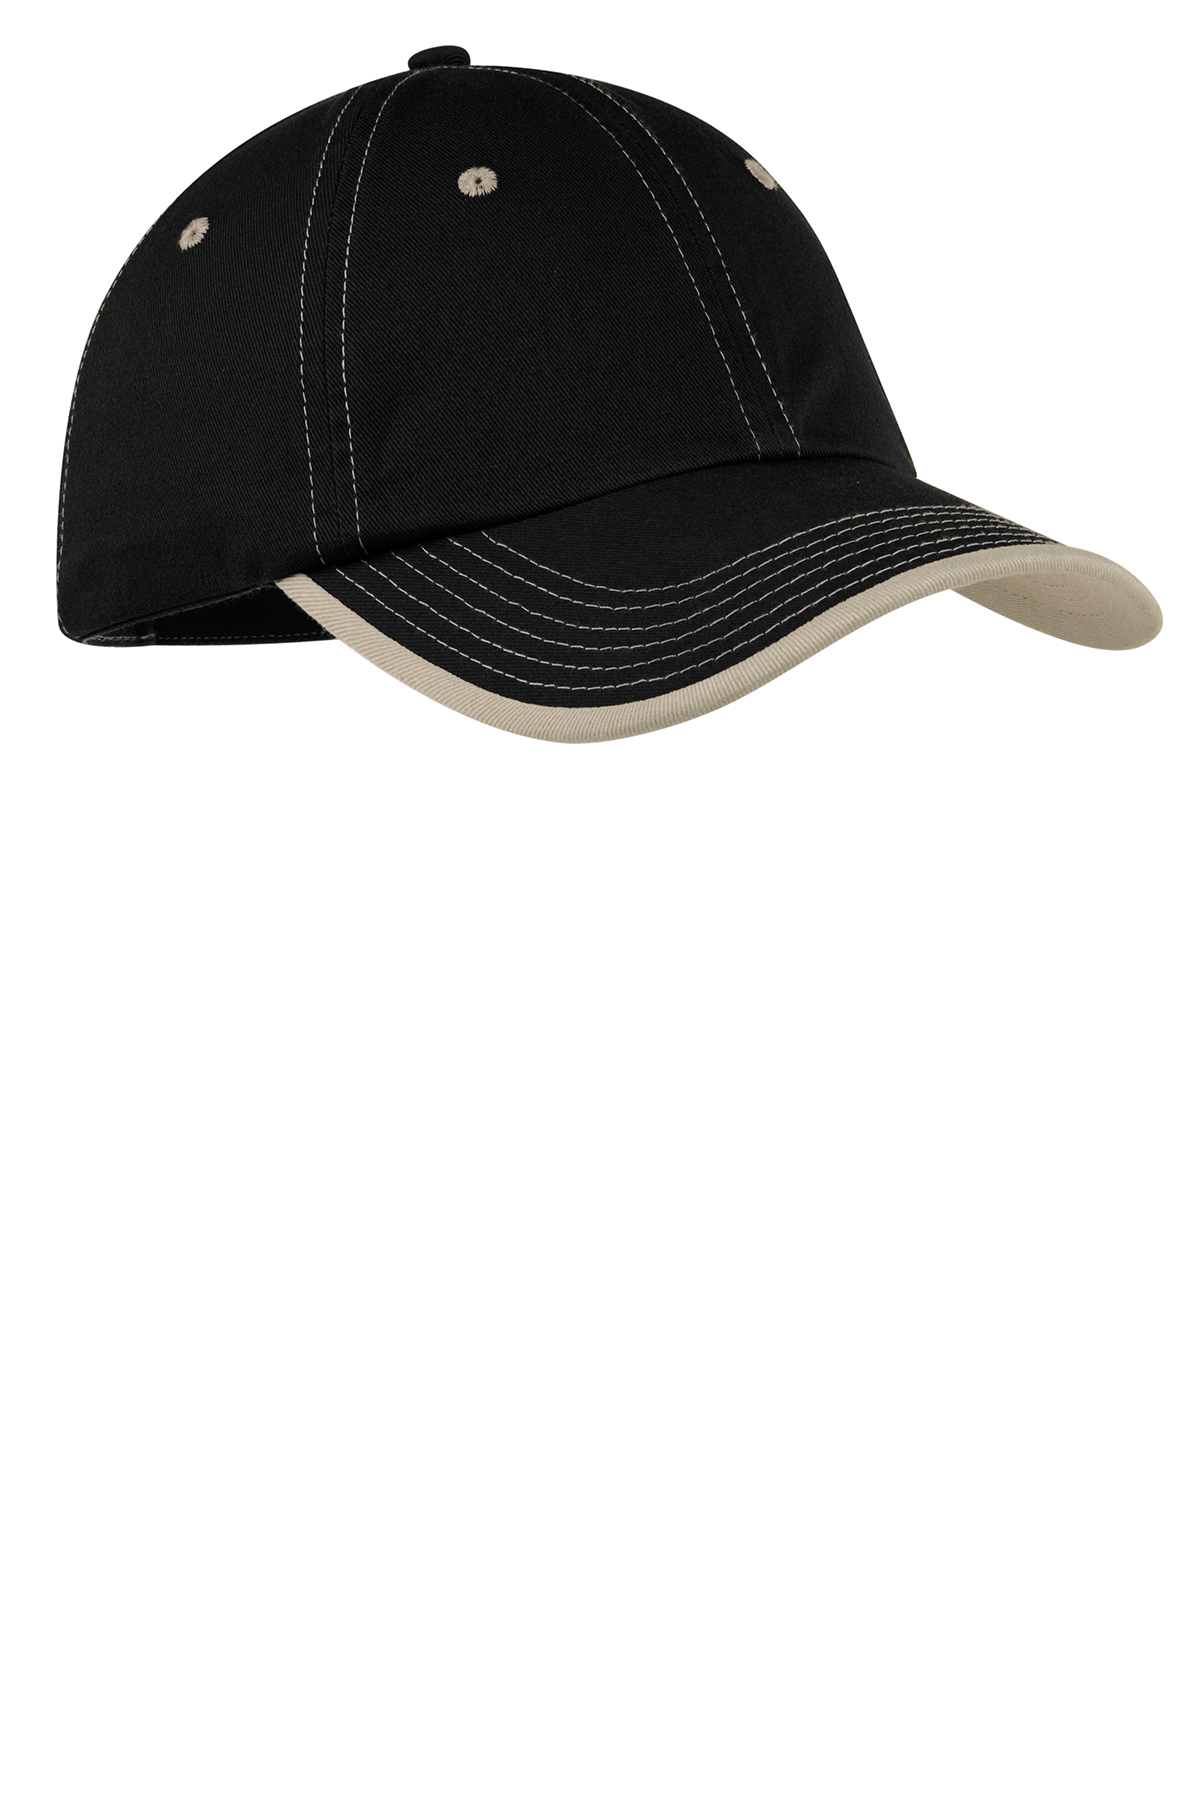 Details about   Genuine BlancPain black with white stitching Hat Adjustable Baseball Cap 